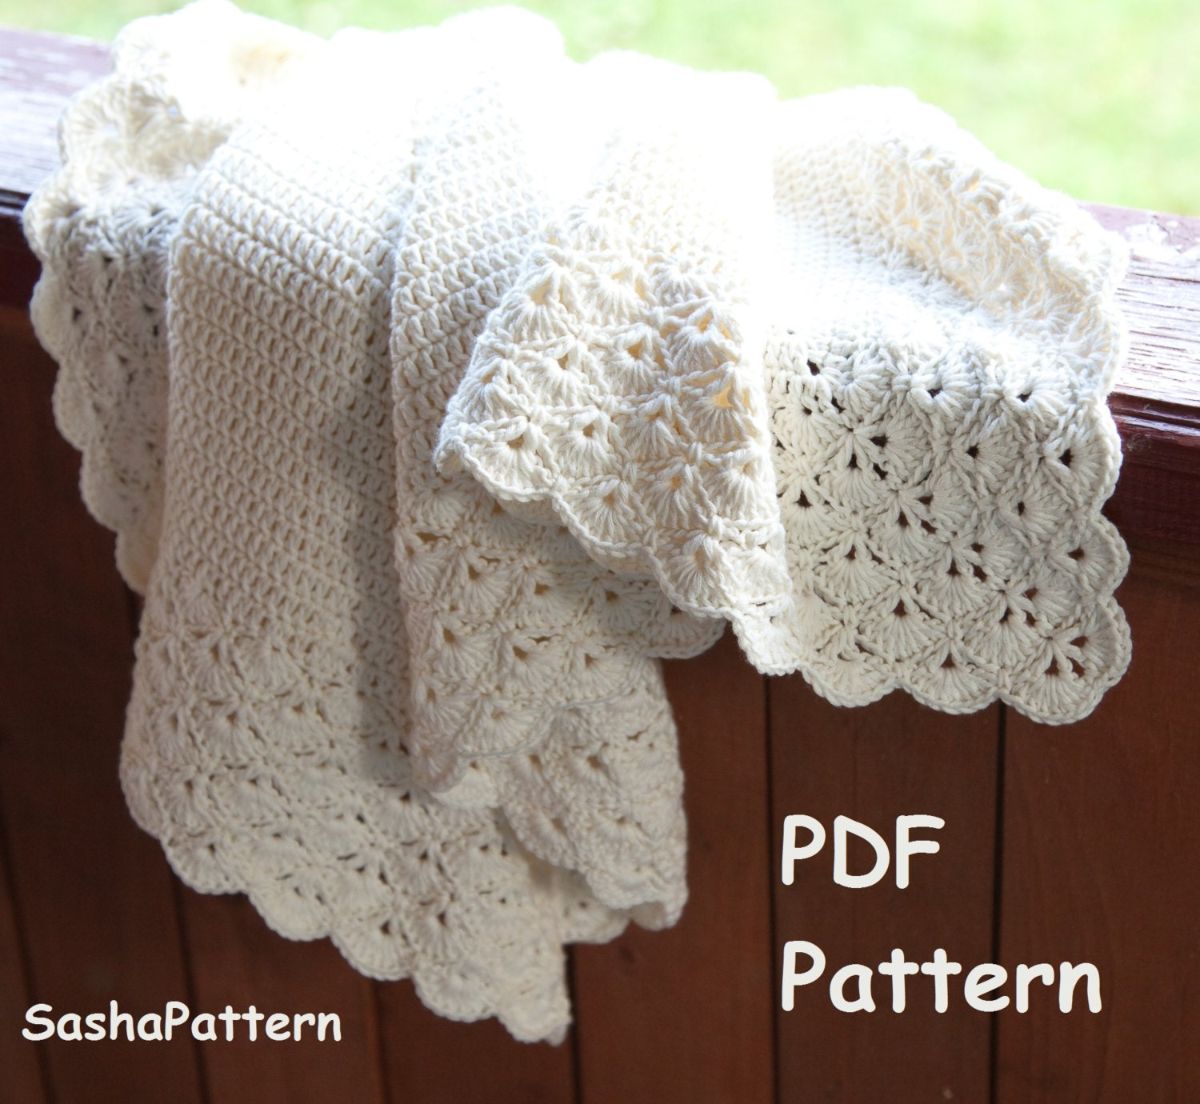 A white crochet lace baby blanket with a scallop edge on all sides bunched up on a wooden fence.